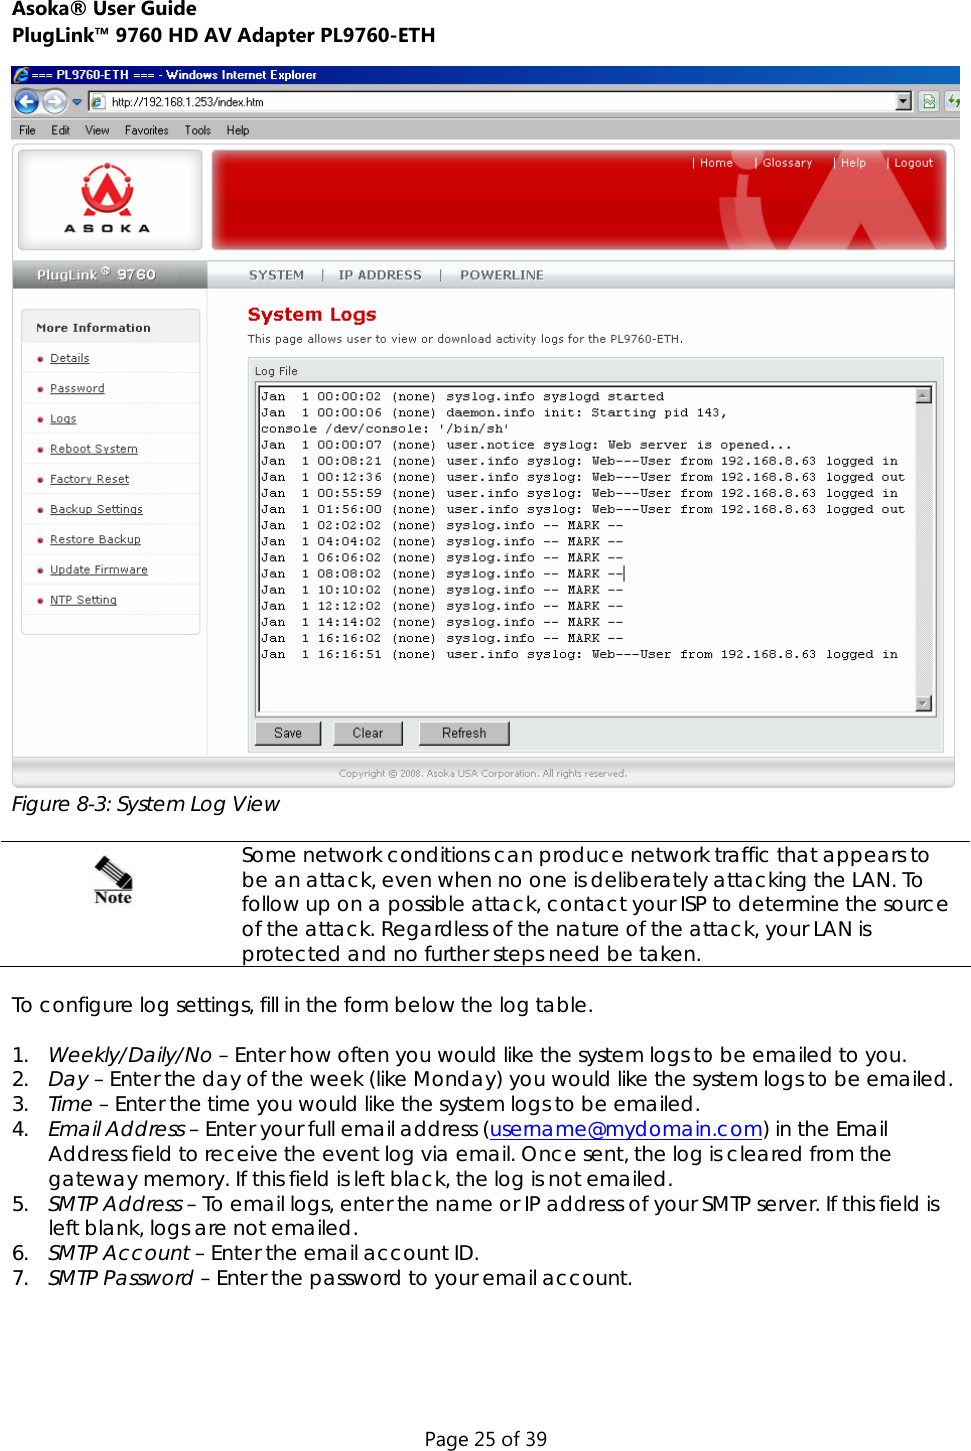 Asoka® User Guide  PlugLink™ 9760 HD AV Adapter PL9760-ETH Page 25 of 39  Figure 8-3: System Log View   Some network conditions can produce network traffic that appears to be an attack, even when no one is deliberately attacking the LAN. To follow up on a possible attack, contact your ISP to determine the source of the attack. Regardless of the nature of the attack, your LAN is protected and no further steps need be taken.  To configure log settings, fill in the form below the log table.  1. Weekly/Daily/No – Enter how often you would like the system logs to be emailed to you. 2. Day – Enter the day of the week (like Monday) you would like the system logs to be emailed. 3. Time – Enter the time you would like the system logs to be emailed.  4. Email Address – Enter your full email address (username@mydomain.com) in the Email Address field to receive the event log via email. Once sent, the log is cleared from the gateway memory. If this field is left black, the log is not emailed. 5. SMTP Address – To email logs, enter the name or IP address of your SMTP server. If this field is left blank, logs are not emailed. 6. SMTP Account – Enter the email account ID.  7. SMTP Password – Enter the password to your email account.    